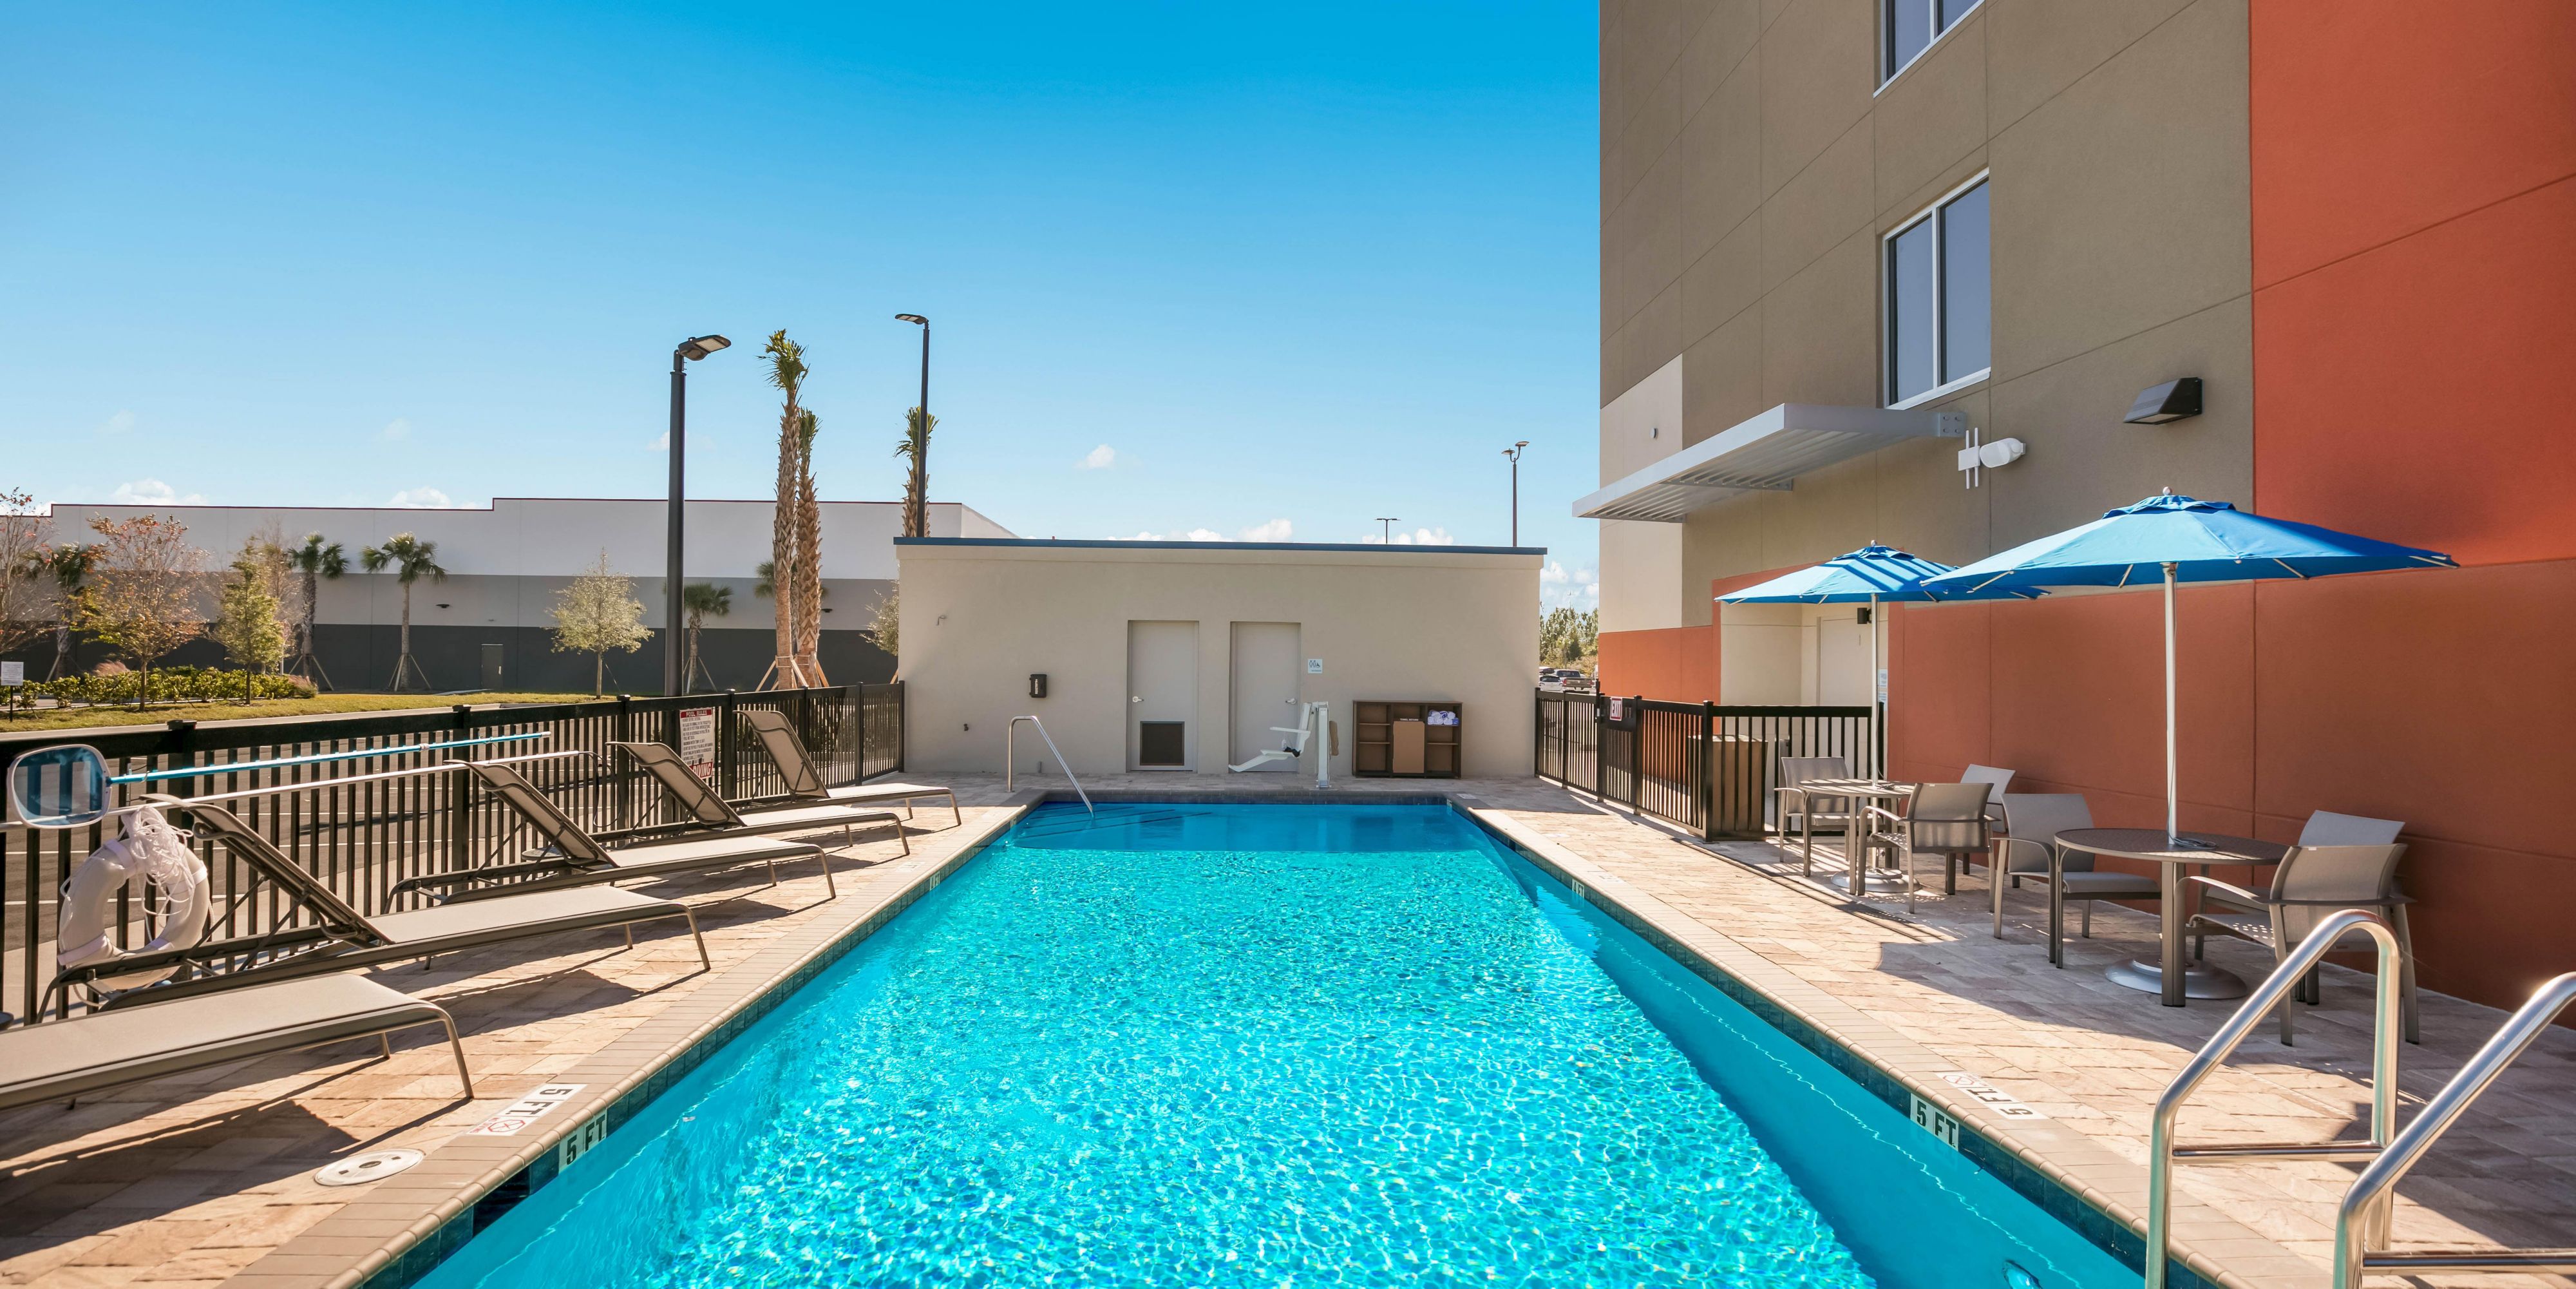 Start your day with a morning swim, take a refreshing afternoon dip, or unwind after a day of business meetings or Jacksonville adventures in our outdoor pool. Dive into relaxation and rejuvenation anytime from 7:00 AM to 10:00 PM. 